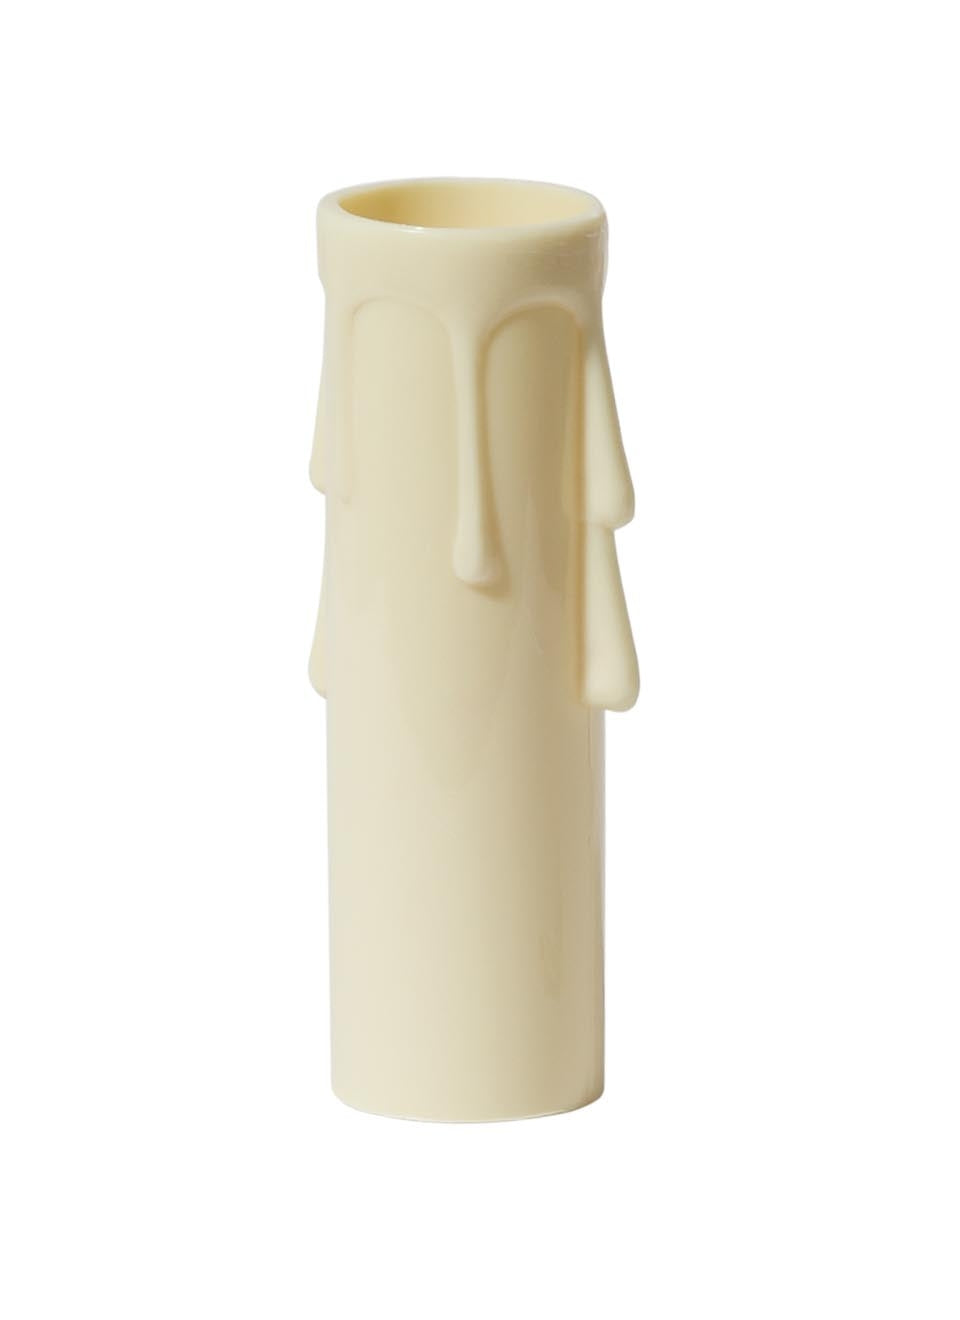 B&p Lamp Ivory Color, Candelabra Size Candle Cover